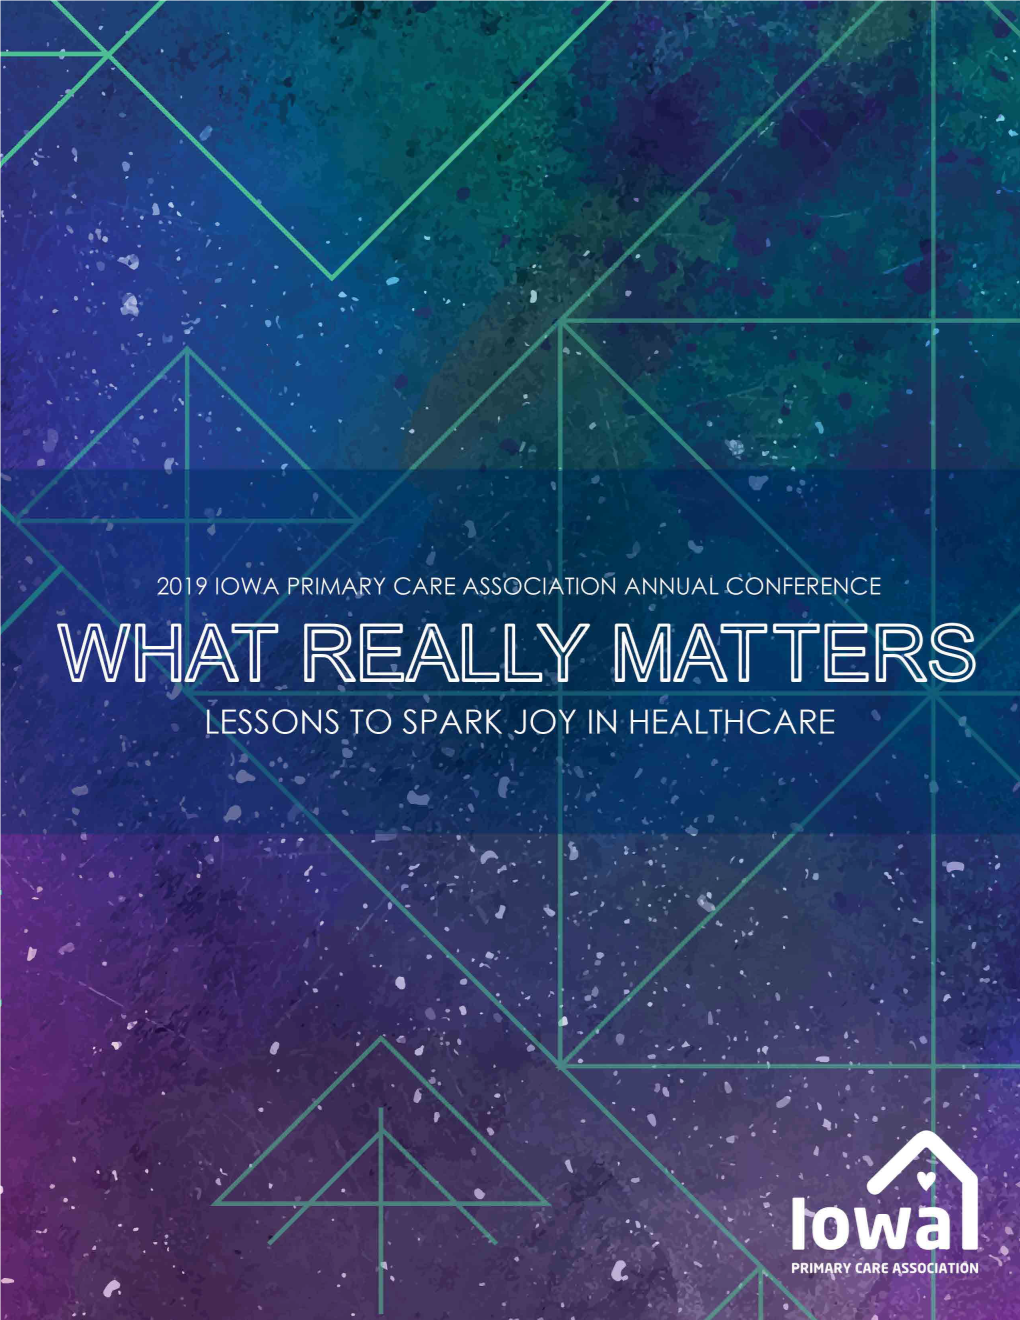 Annual Conference! This Year, We’Re Focusing on “What Really Matters” to Our Health Centers, Our Patients, and Our Communities